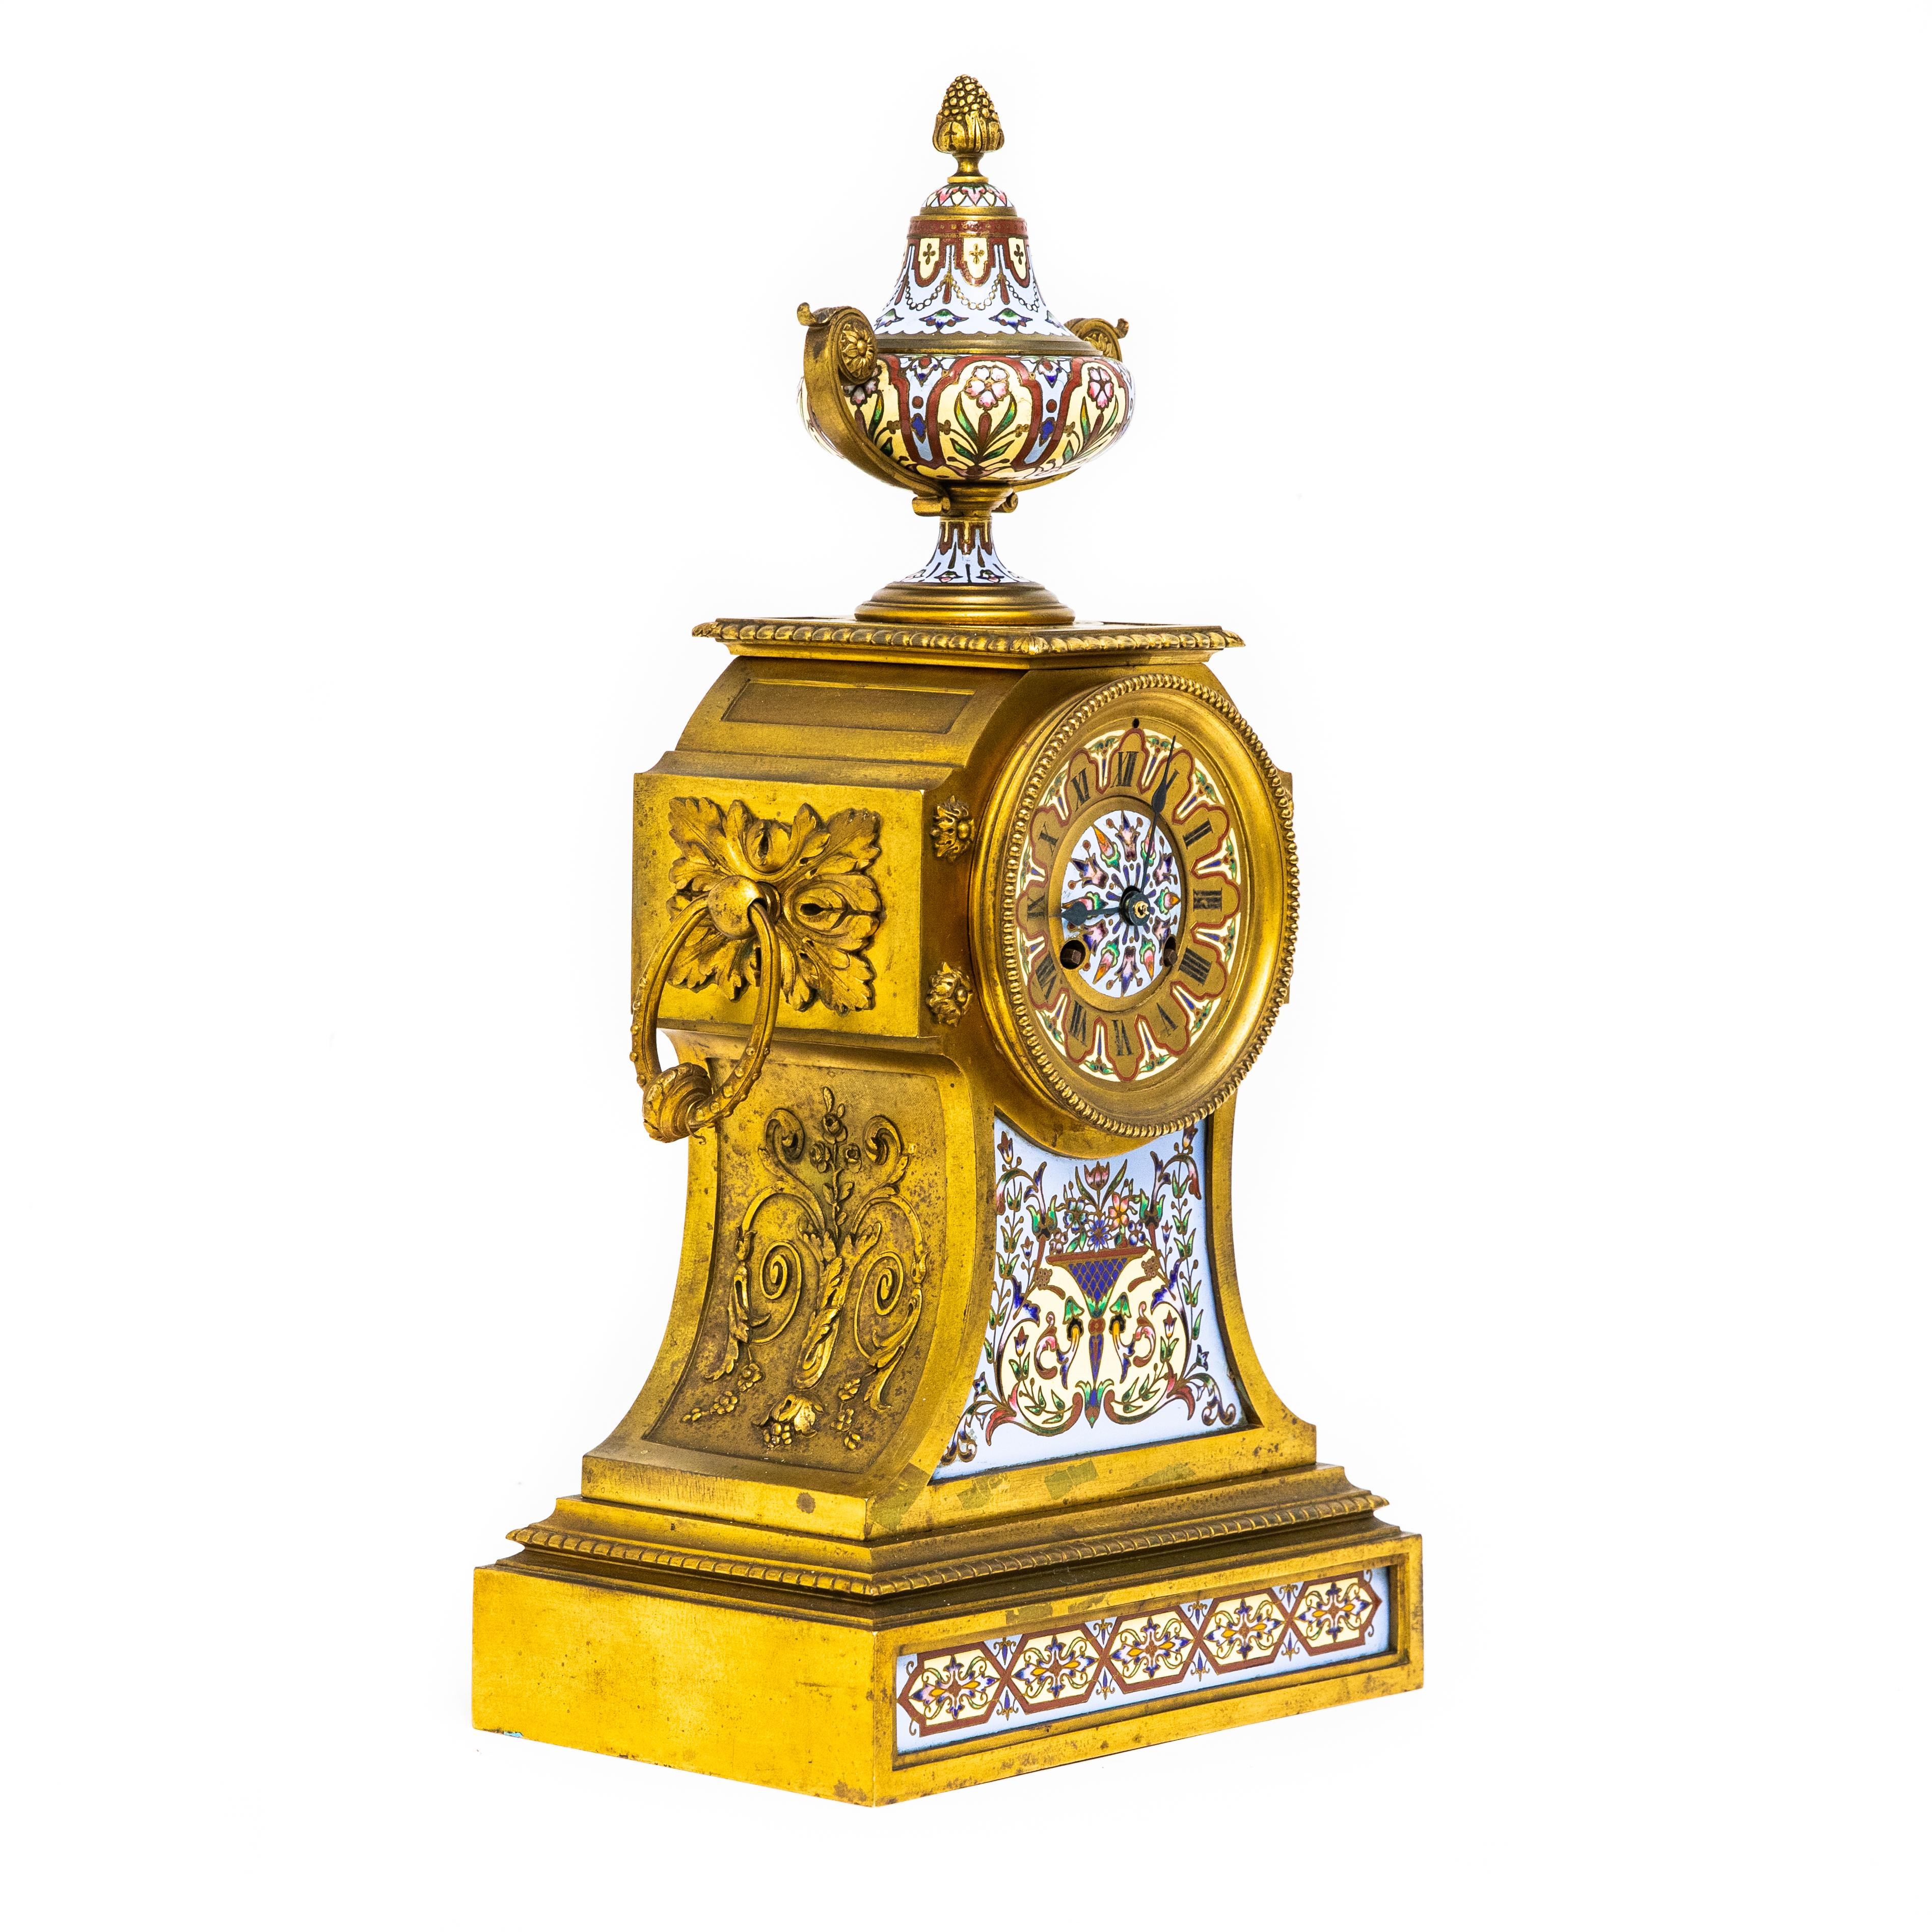 Offered is a French champlevé enamel gilt bronze mantel clock with roman numerals, surmounted by an urn finial. Measures: 18.5